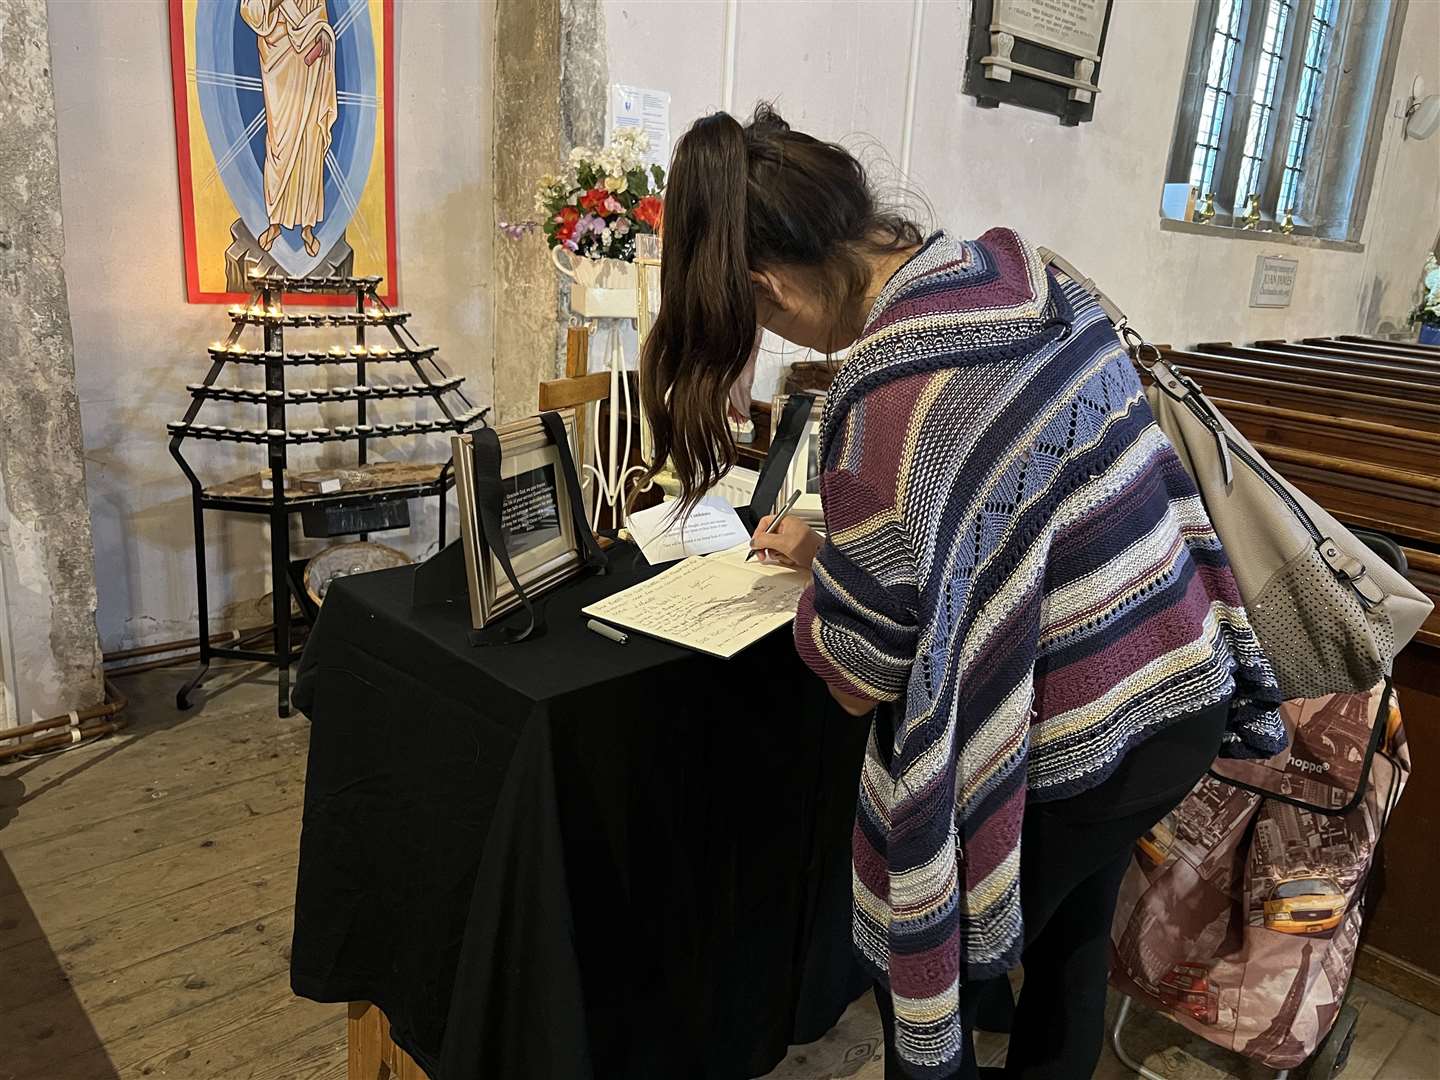 Someone writing in the book of condolence at St Michael's Church, Sittingbourne